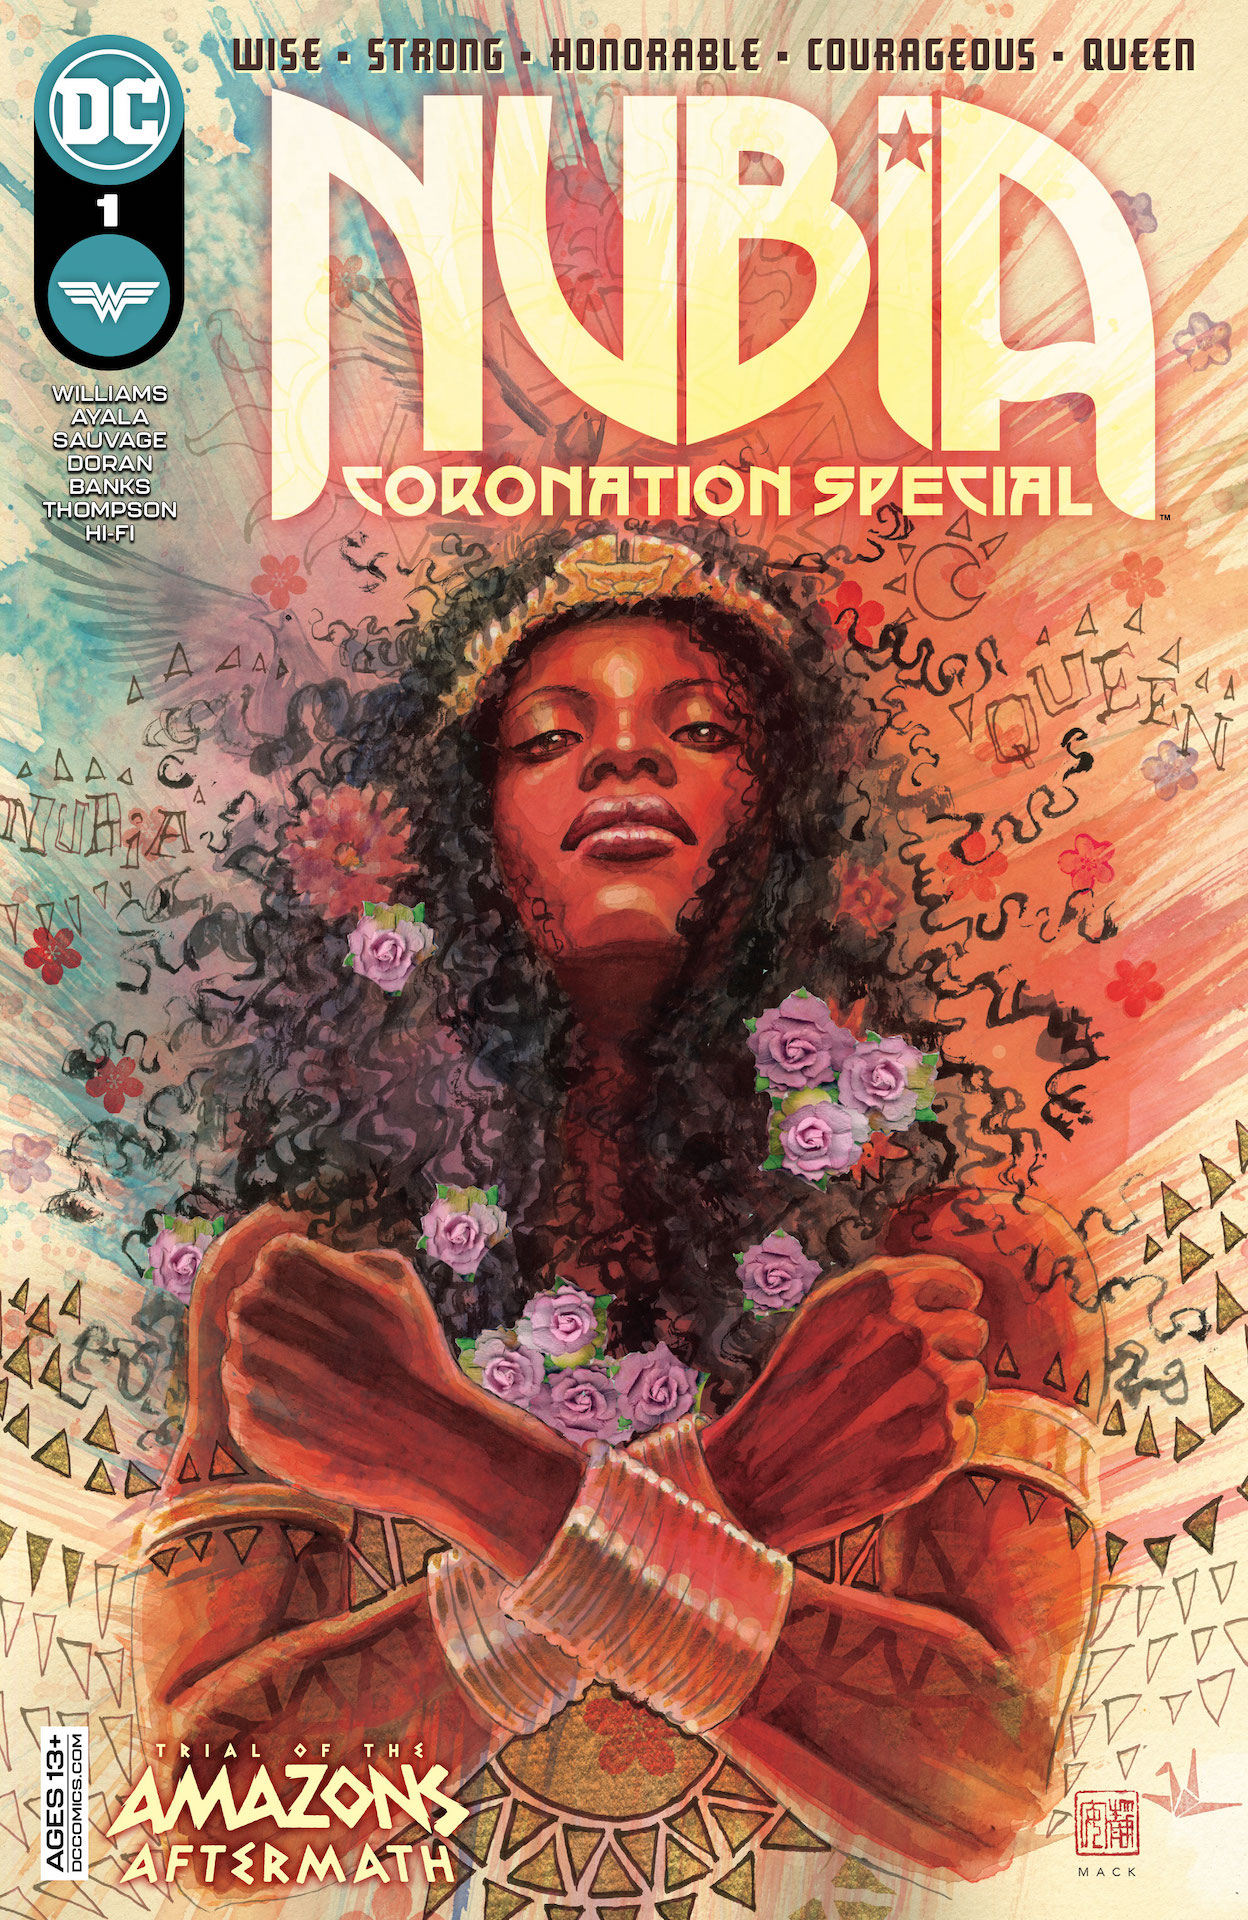 DC Preview: Nubia: Coronation Special #1